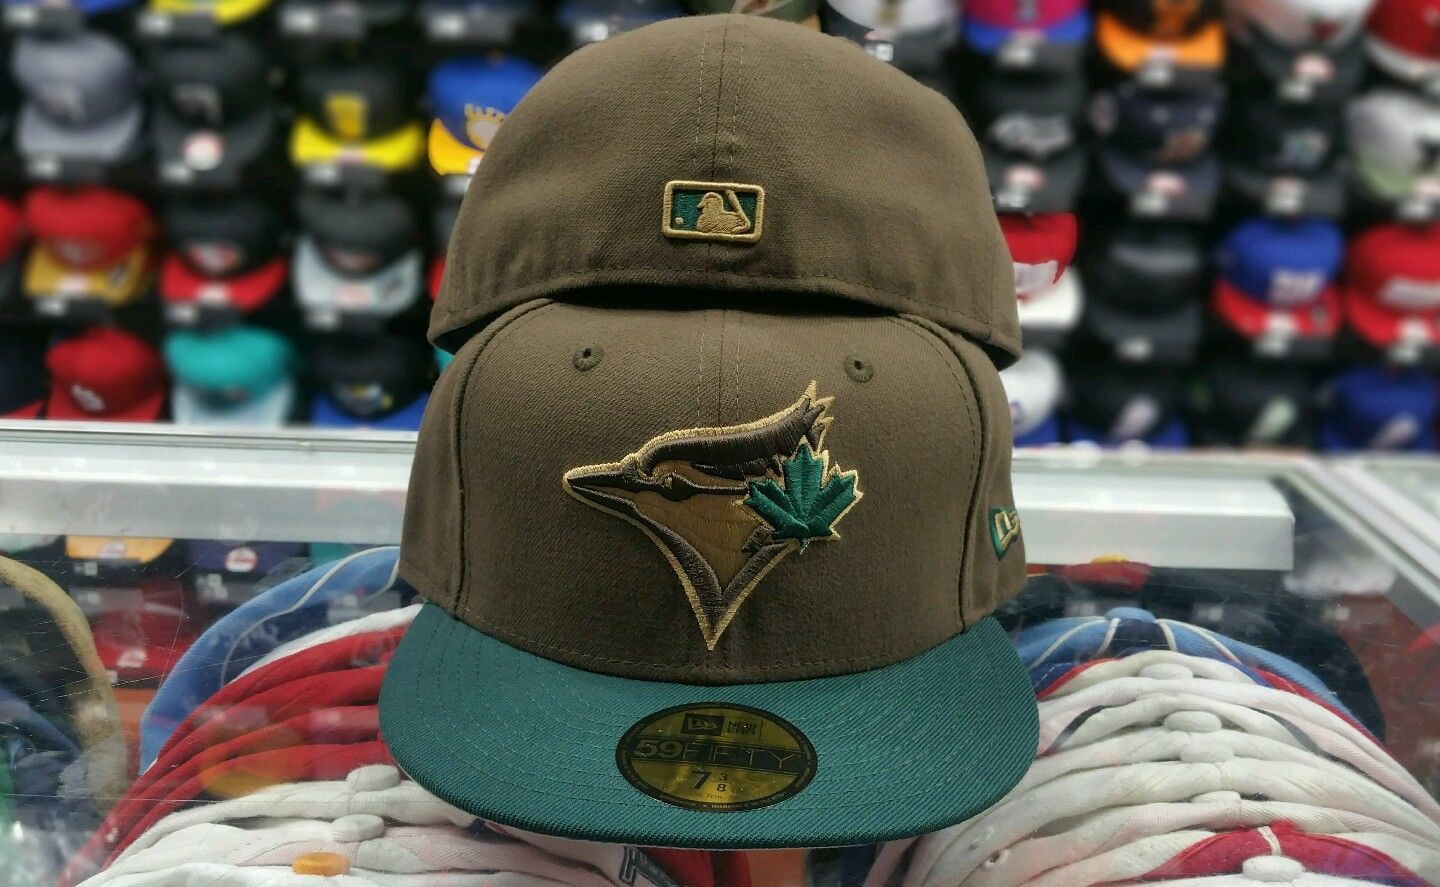 grey blue jays fitted